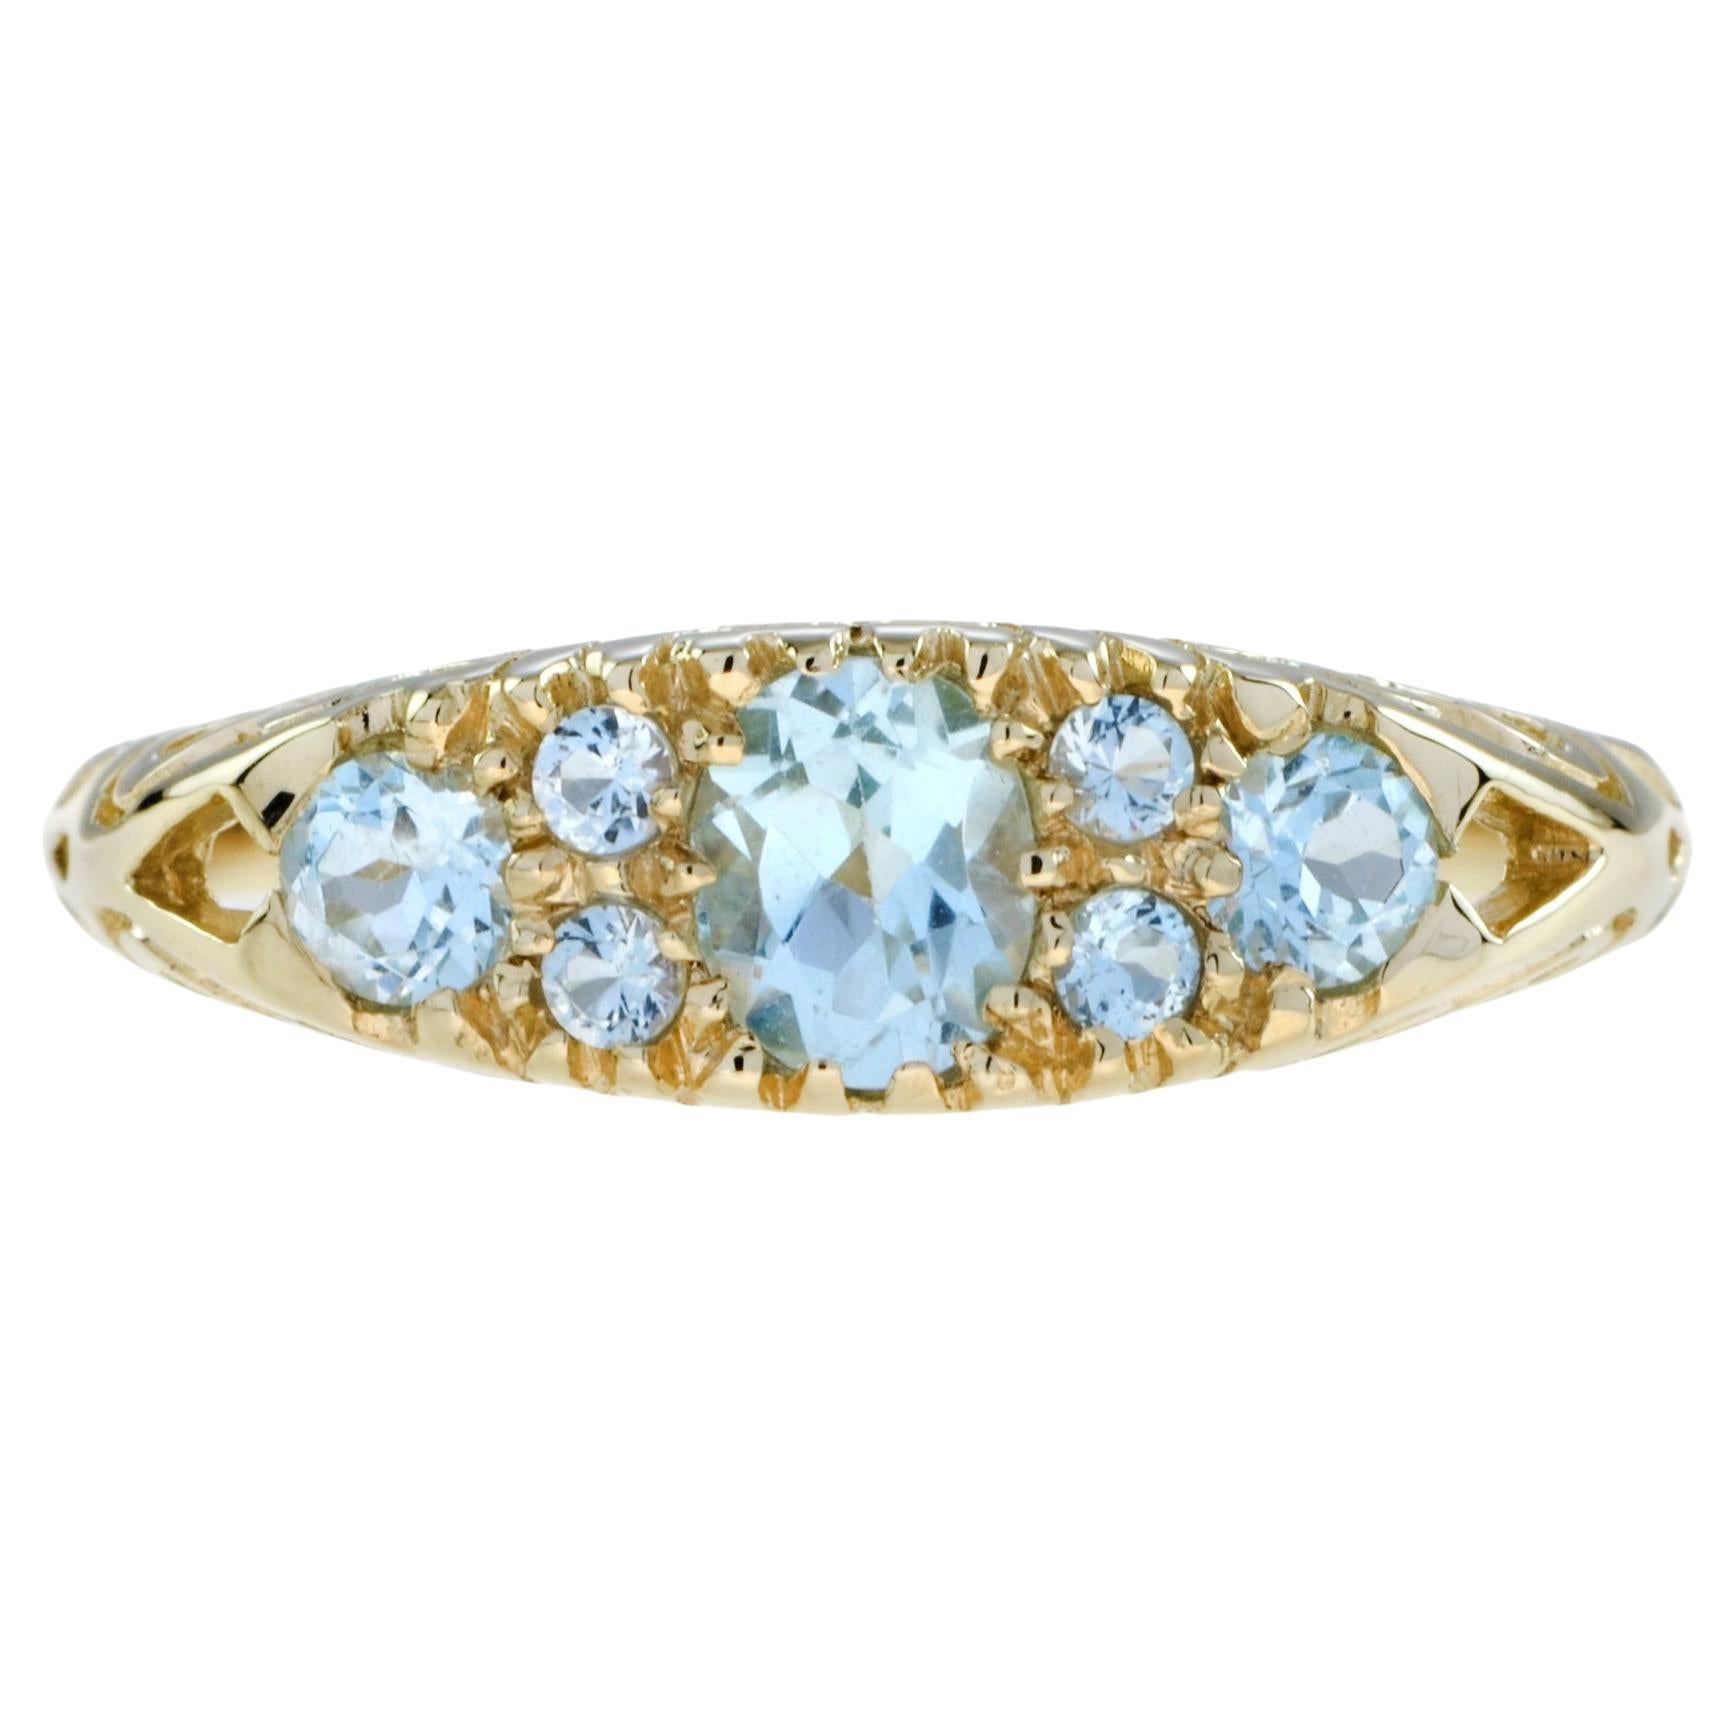 For Sale:  Blue Topaz Vintage Style Three Stone Filigree Ring in 14K Yellow Gold 2